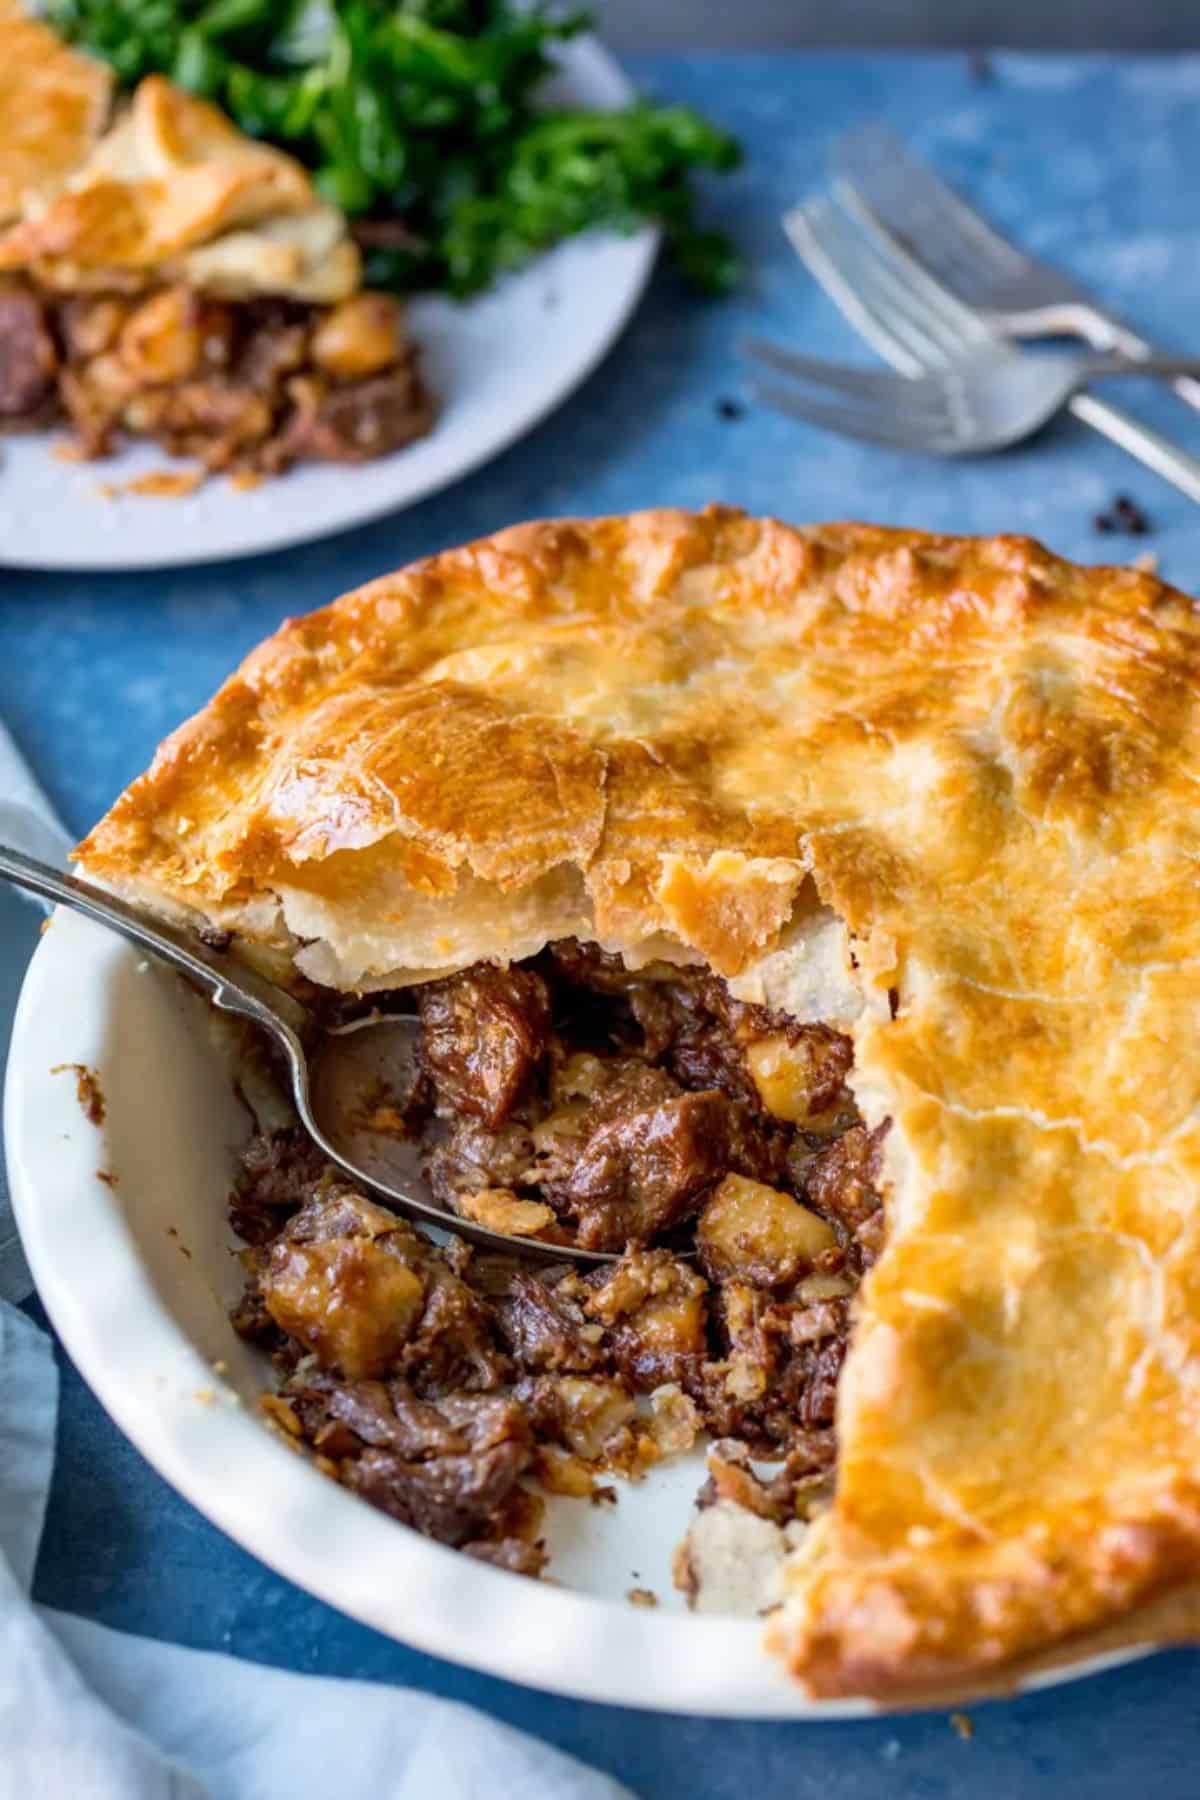 Juicy steak pie in a white bowl with a spoon.